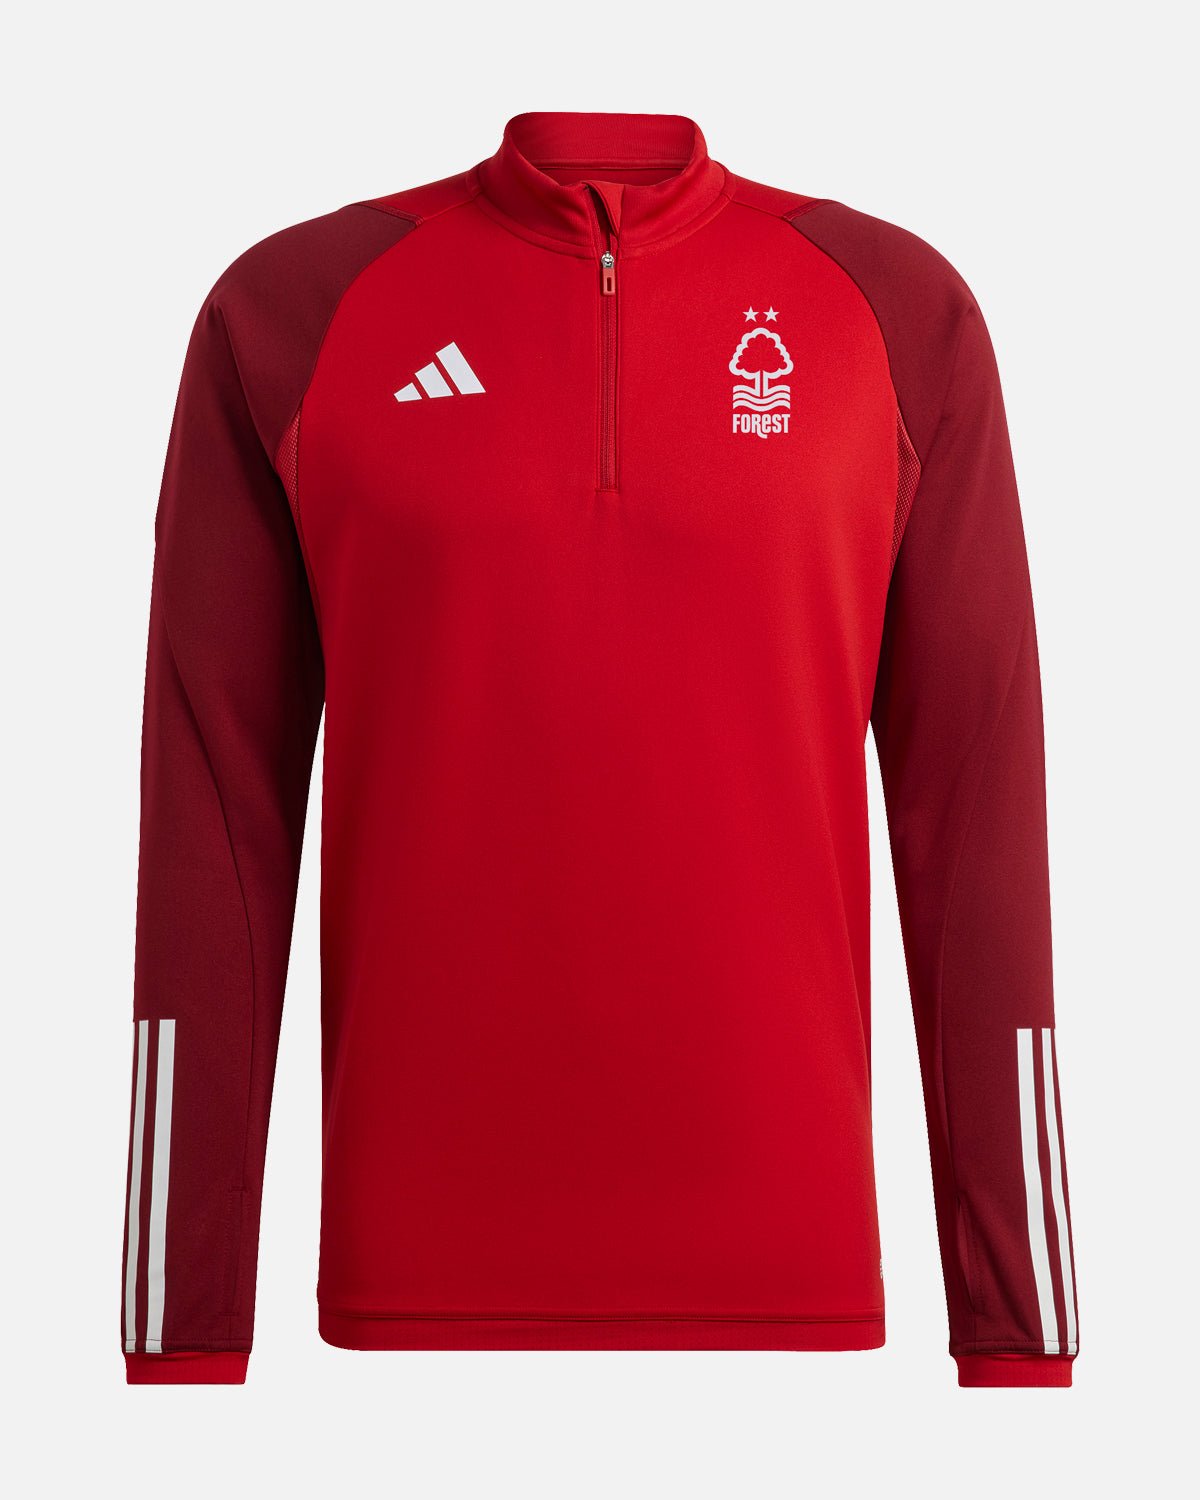 NFFC Red Training Top 23-24 - Nottingham Forest FC